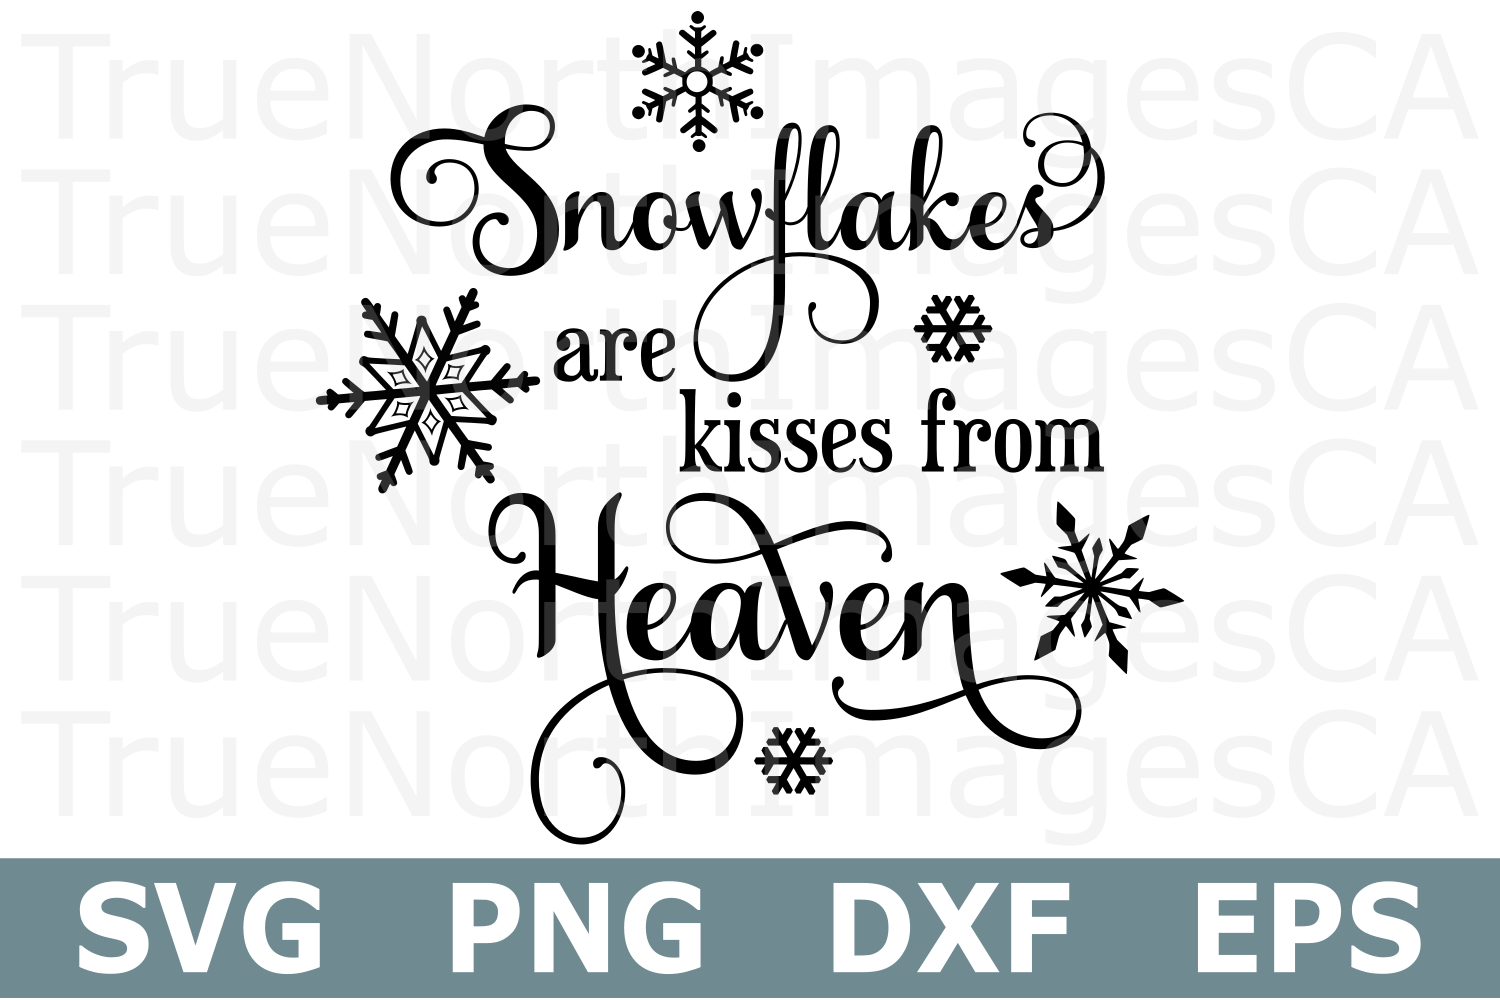 Snowflakes are Kisses from Heaven - A Christmas SVG Cut File